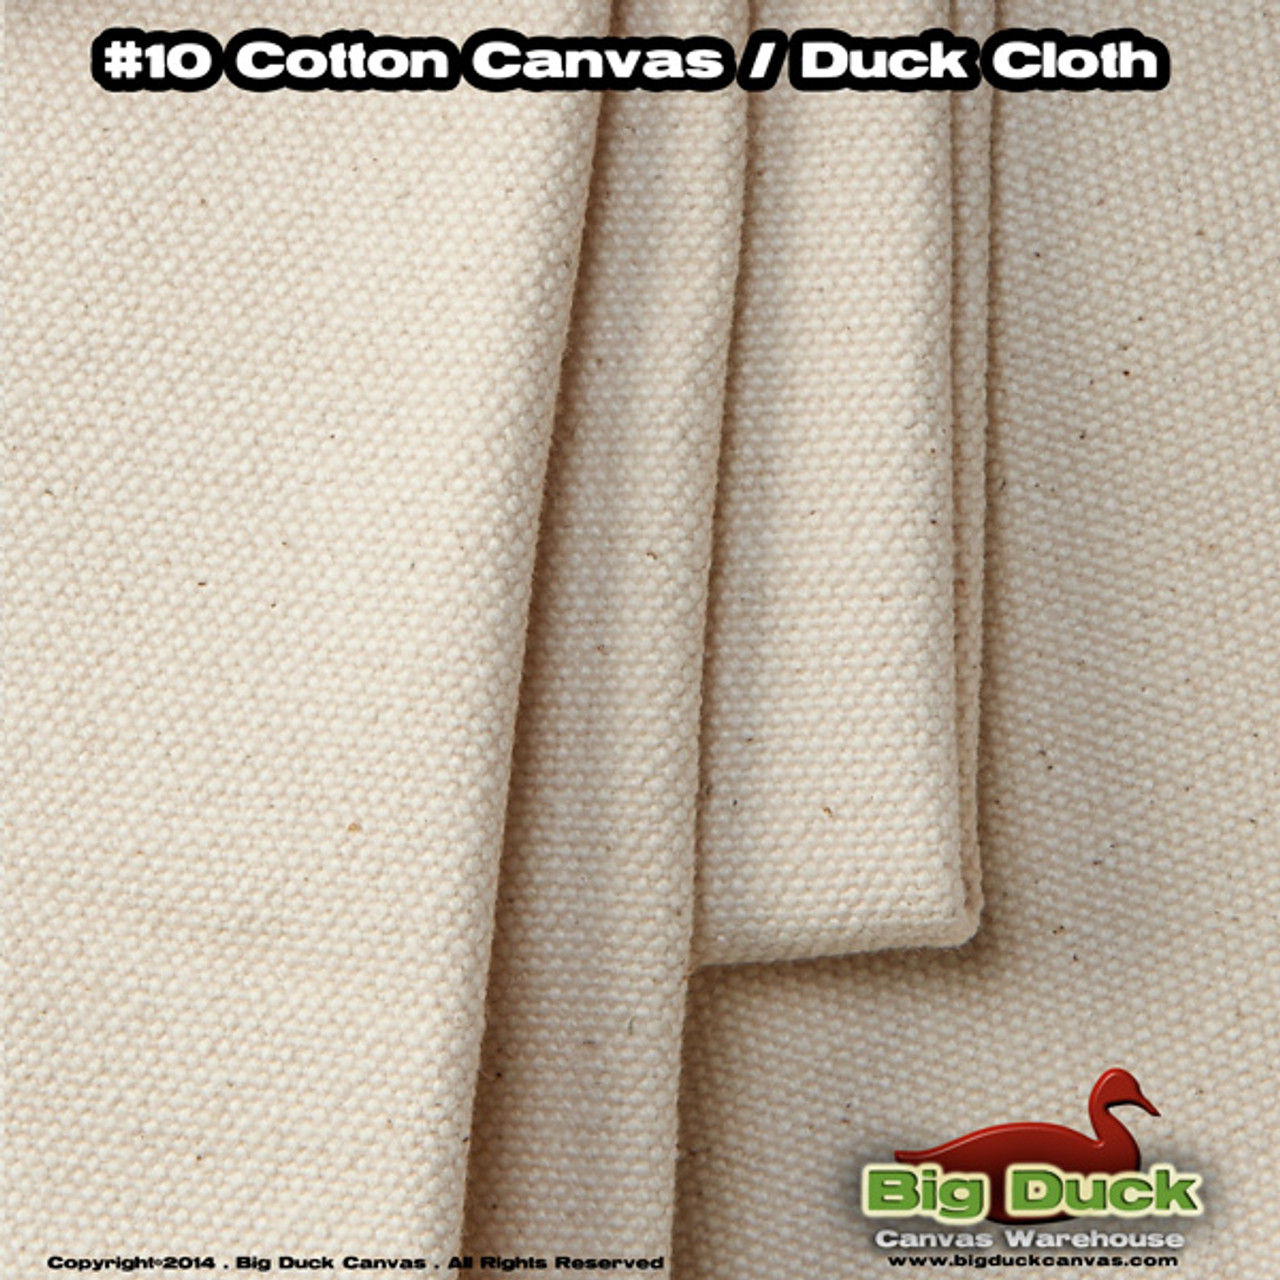 GravitationOnline 100% Natural Cotton 7 oz Canvas Fabric (Duck) 63 Inches Wide x 3 Yards Long